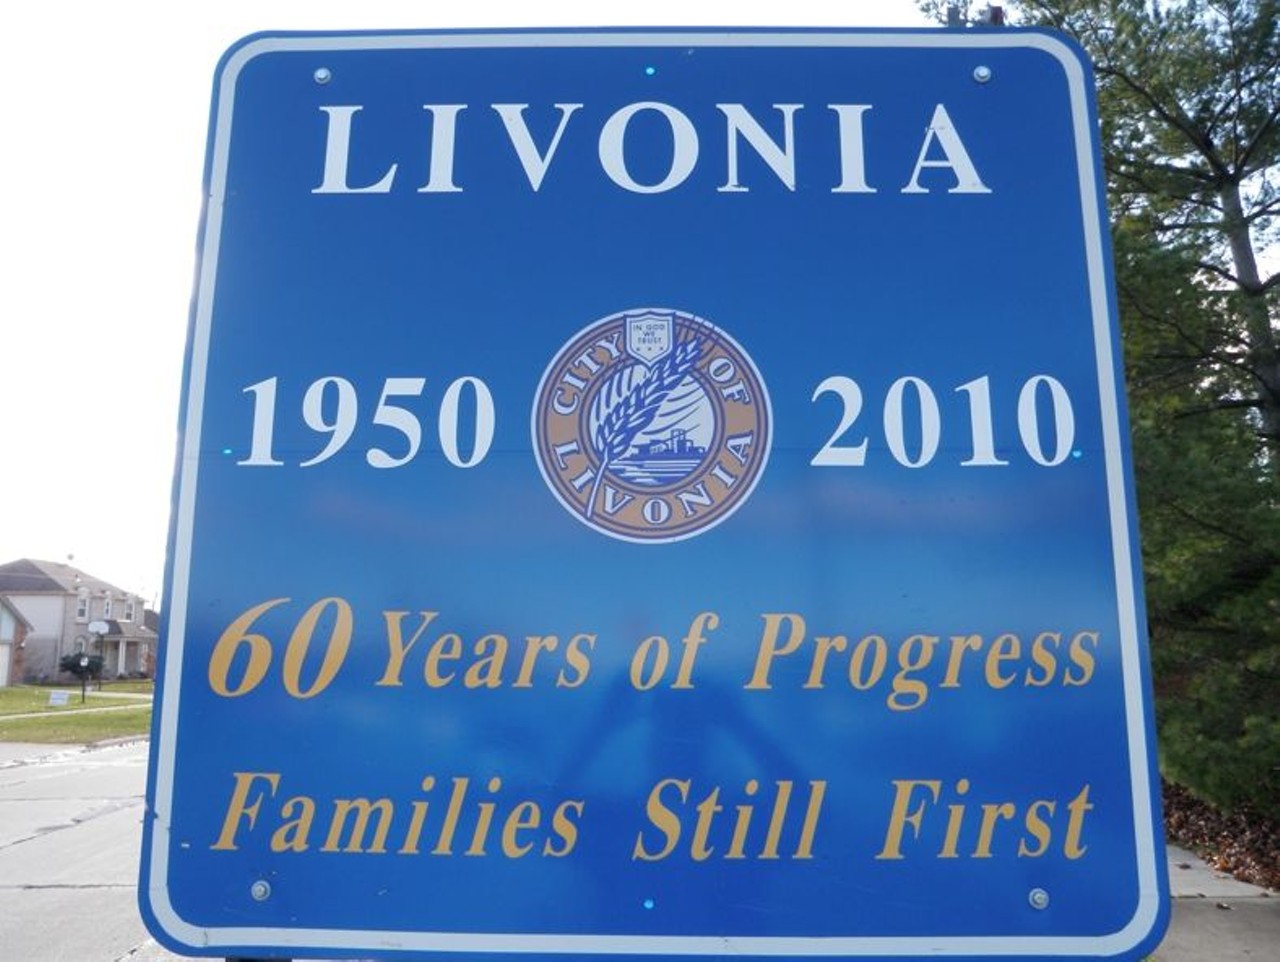 5: Livonia: People Come First
Although the motto appears, inexplicably, as &#147;Families Come First&#148; at least some of the time on the Livonia website. And if it were anyplace but Livonia, it wouldn't prompt the question: What kind of people come first?